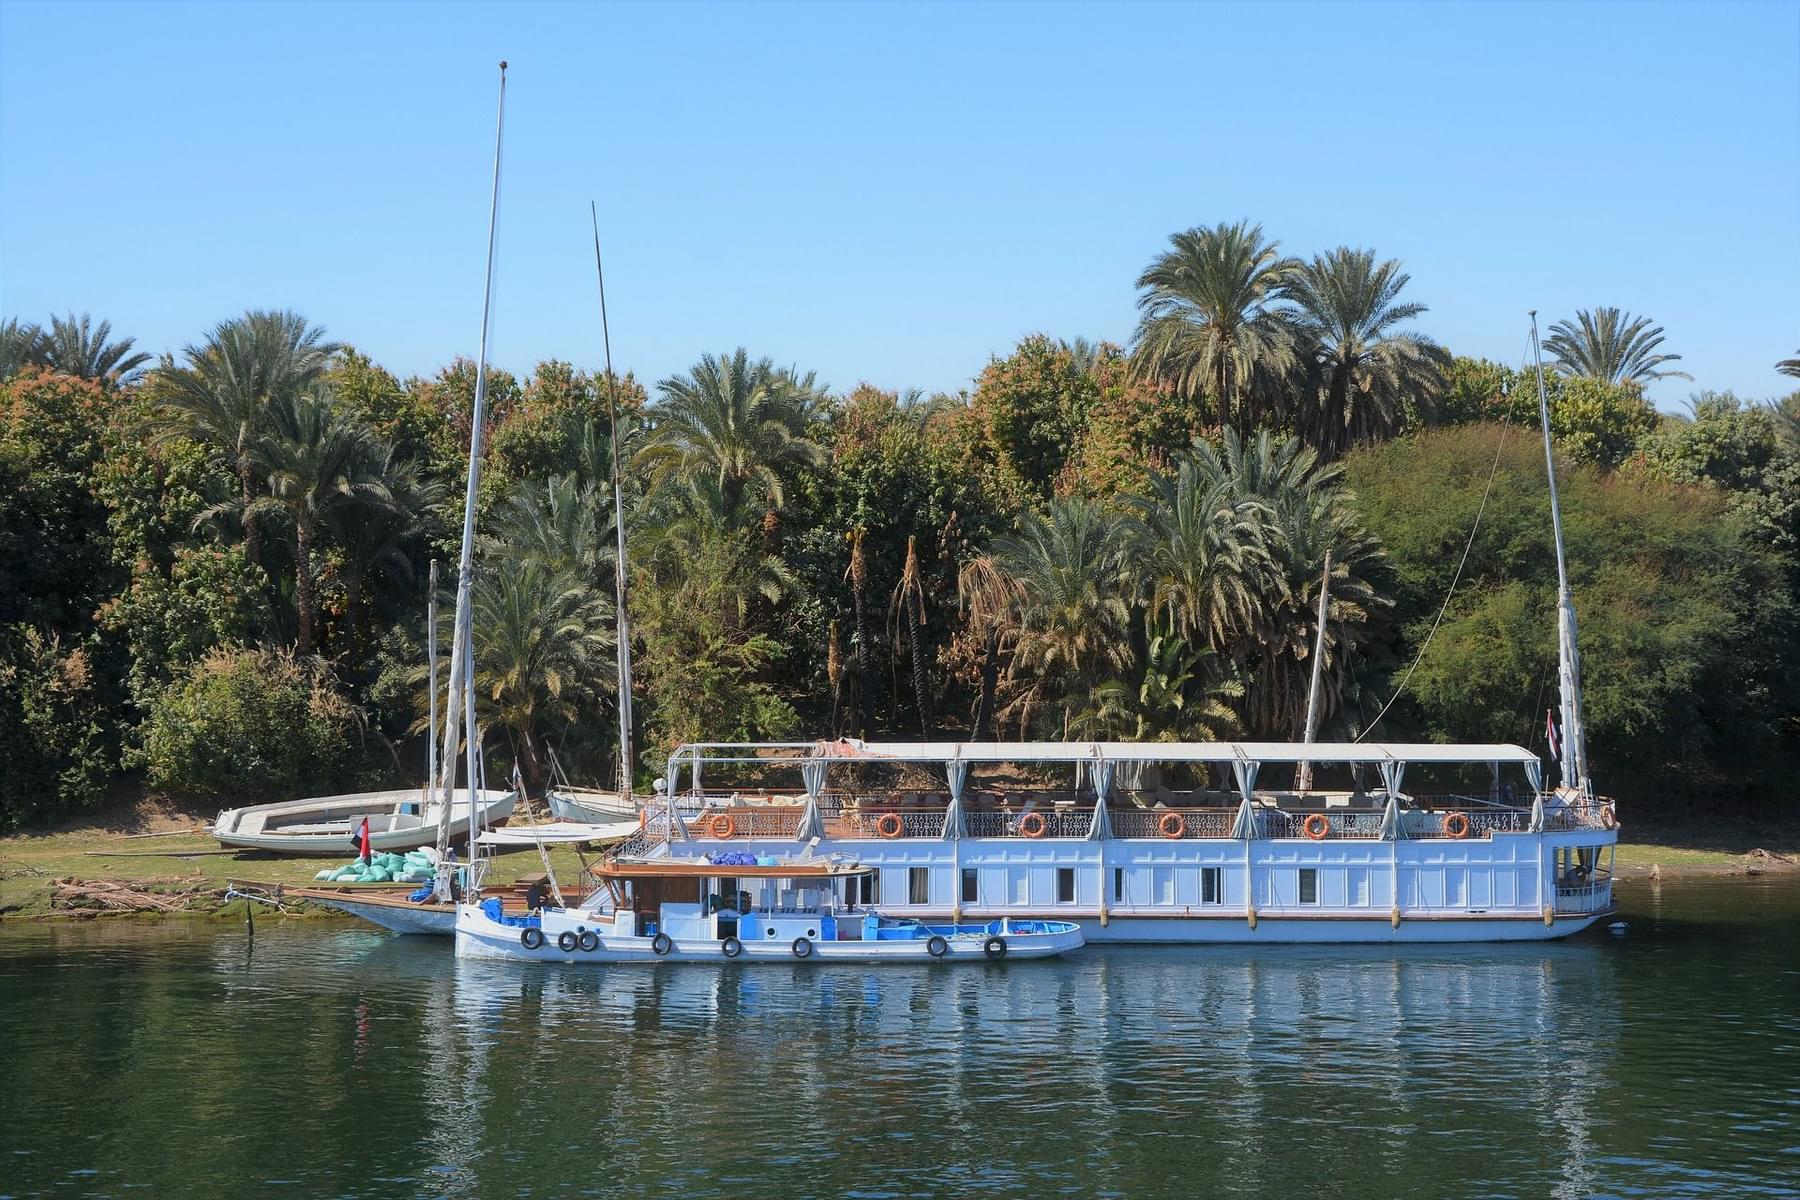 4 Nights Nile River Cruise from Luxor include Abu Simbel